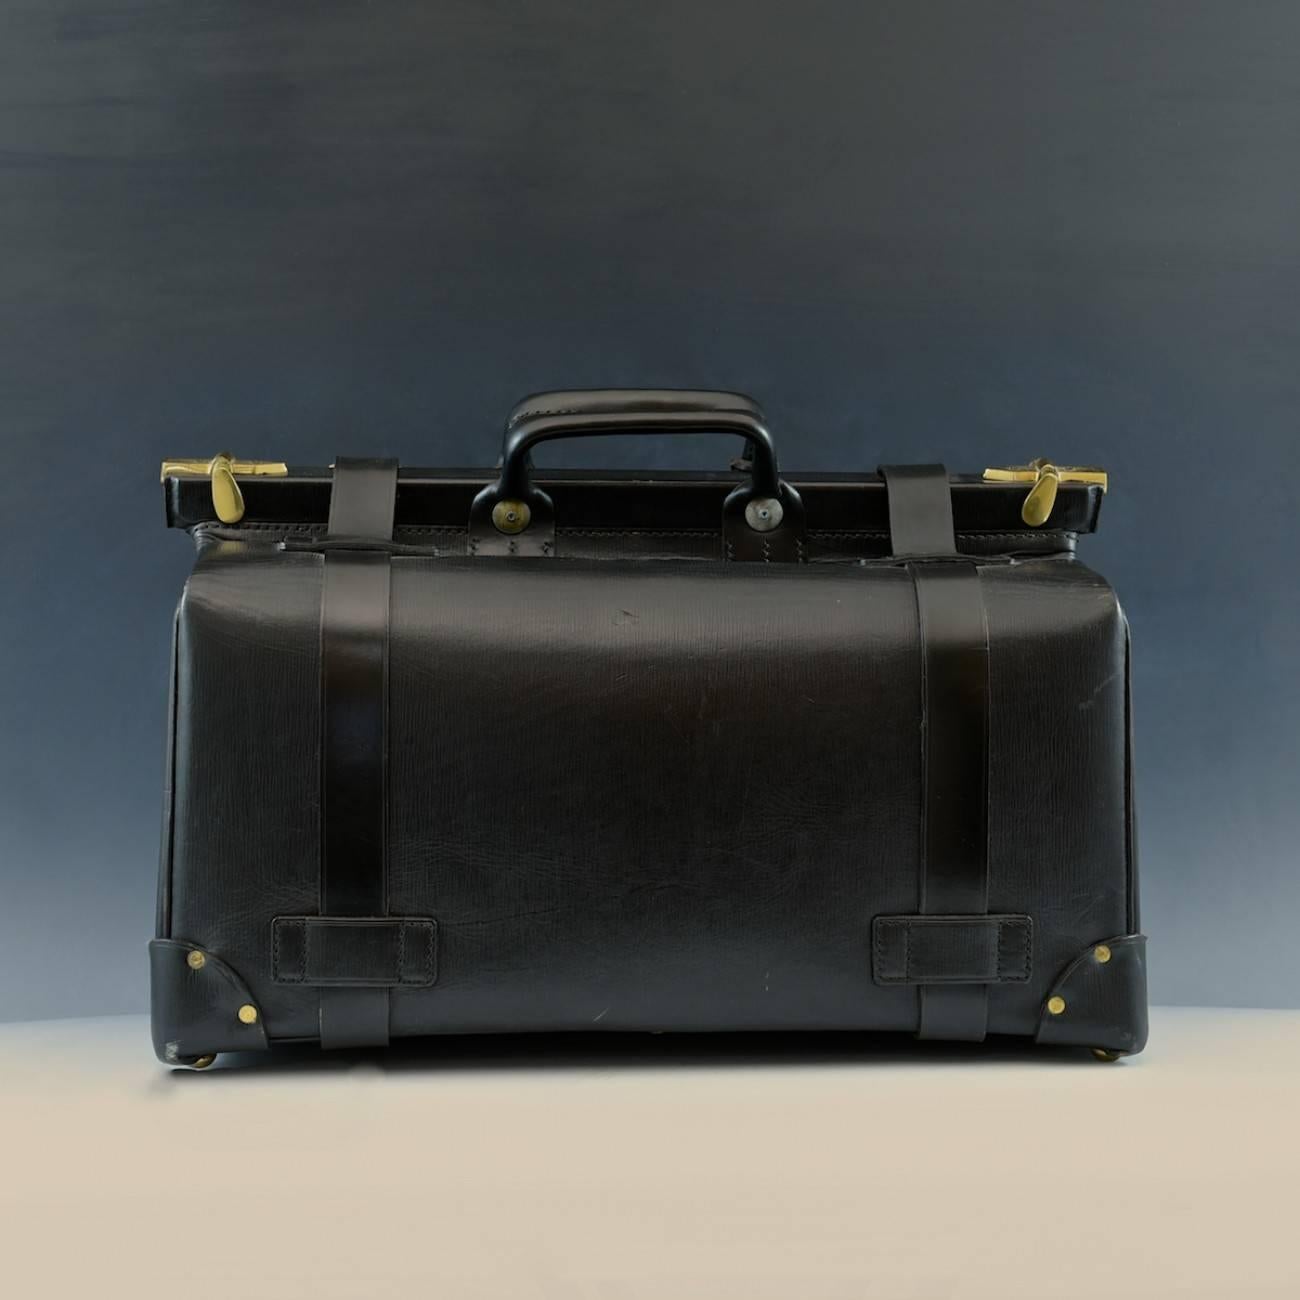 A fabulous gladstone bag made from heavy straw grain black leather with brass fittings and catch, originally made for and retailed by Asprey, circa 1980. Amazing condition!

Bentleys are Members of LAPADA, the London and Provincial Antique Dealers